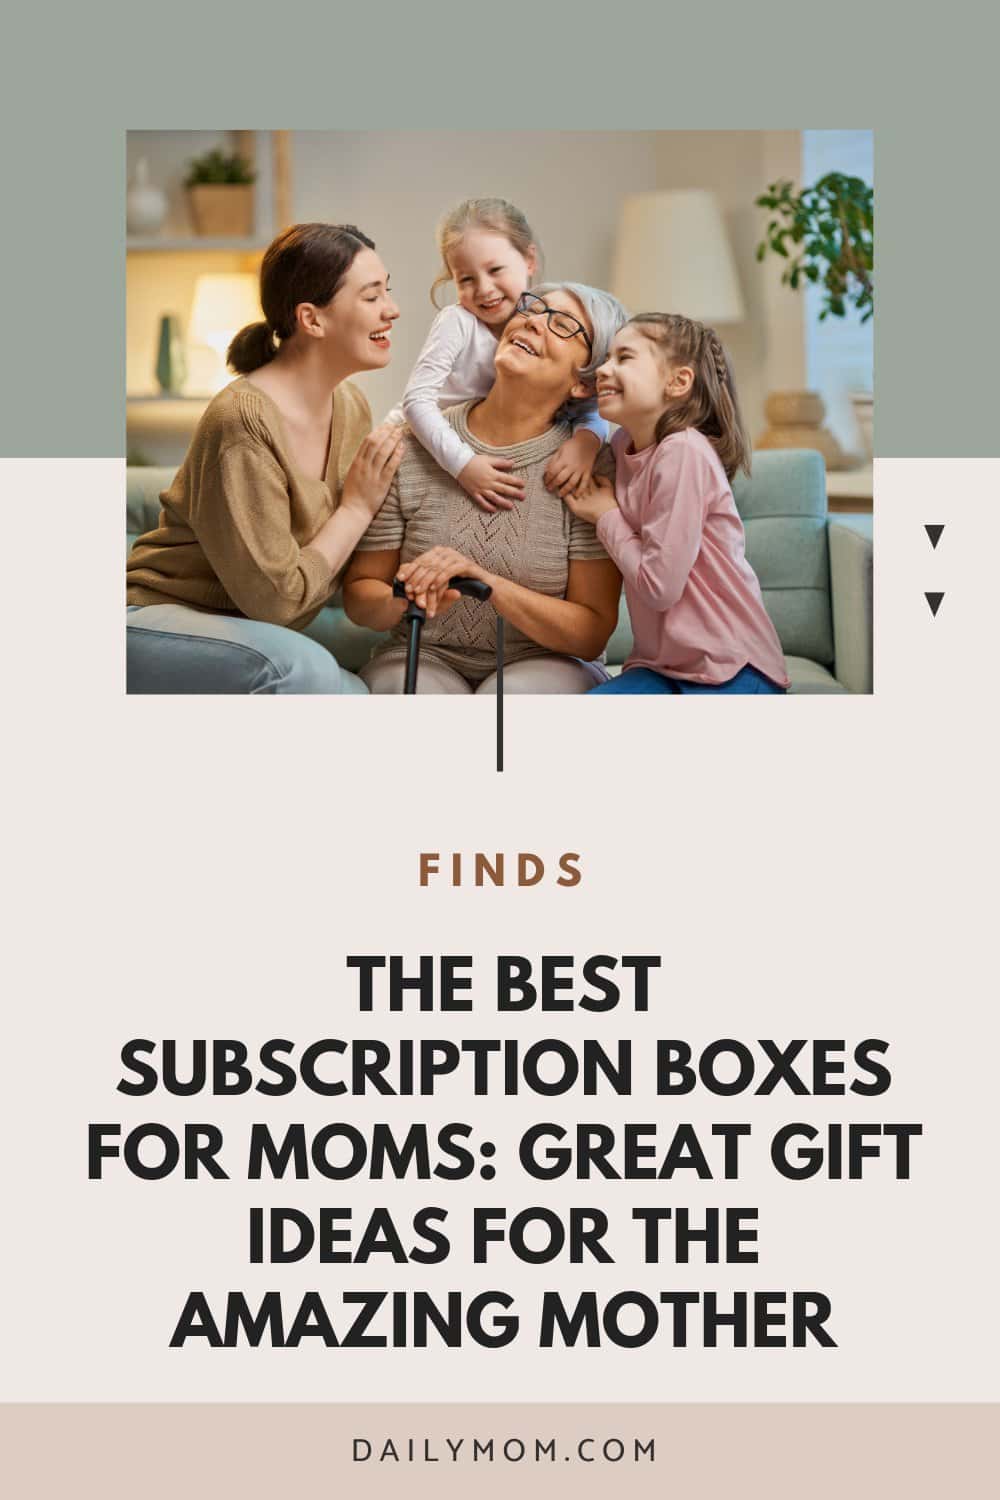 Subscription Boxes For Moms: The Best Gifts And Home Delivery Ideas For Busy Mothers  63 Daily Mom, Magazine For Families